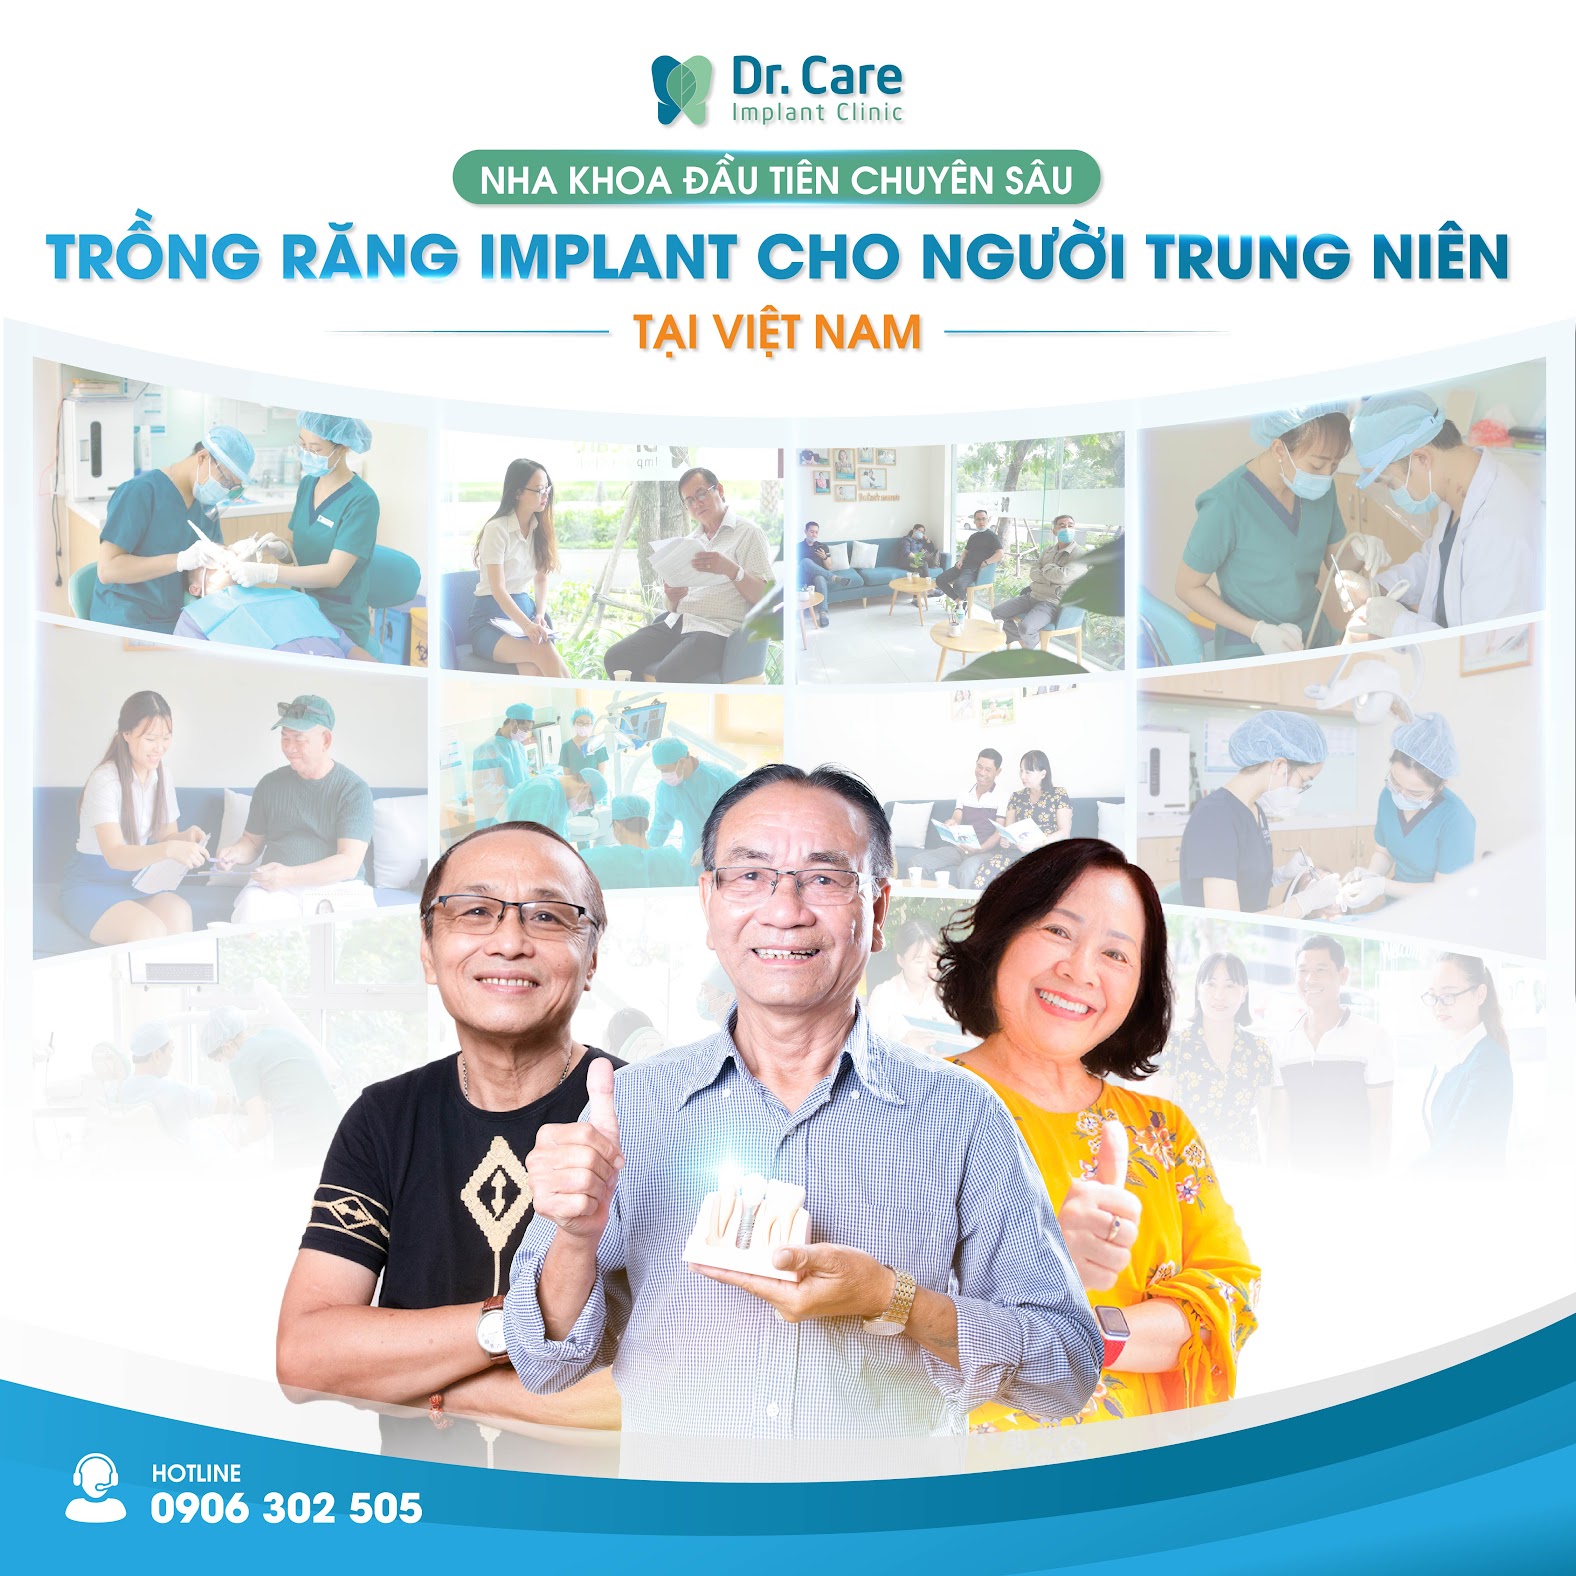 dr. care - Implant Clinic